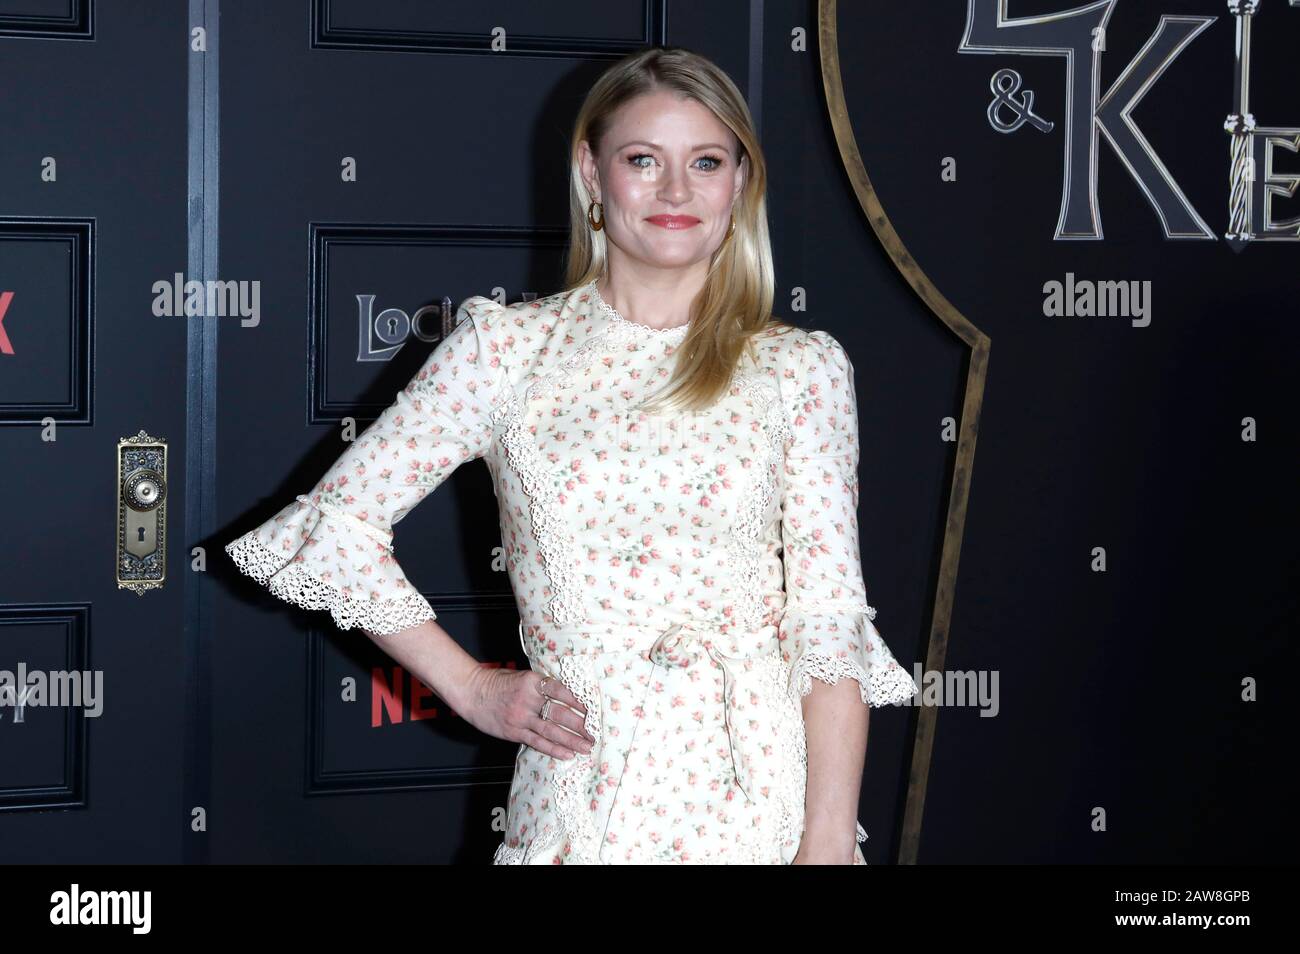 Los Angeles, USA. 05th Feb, 2020. Emilie de Ravin at the premiere of the Netfilx TV series 'Locke & Key' at the Egyptian Theater. Los Angeles, February 5, 2020 | usage worldwide Credit: dpa/Alamy Live News Stock Photo